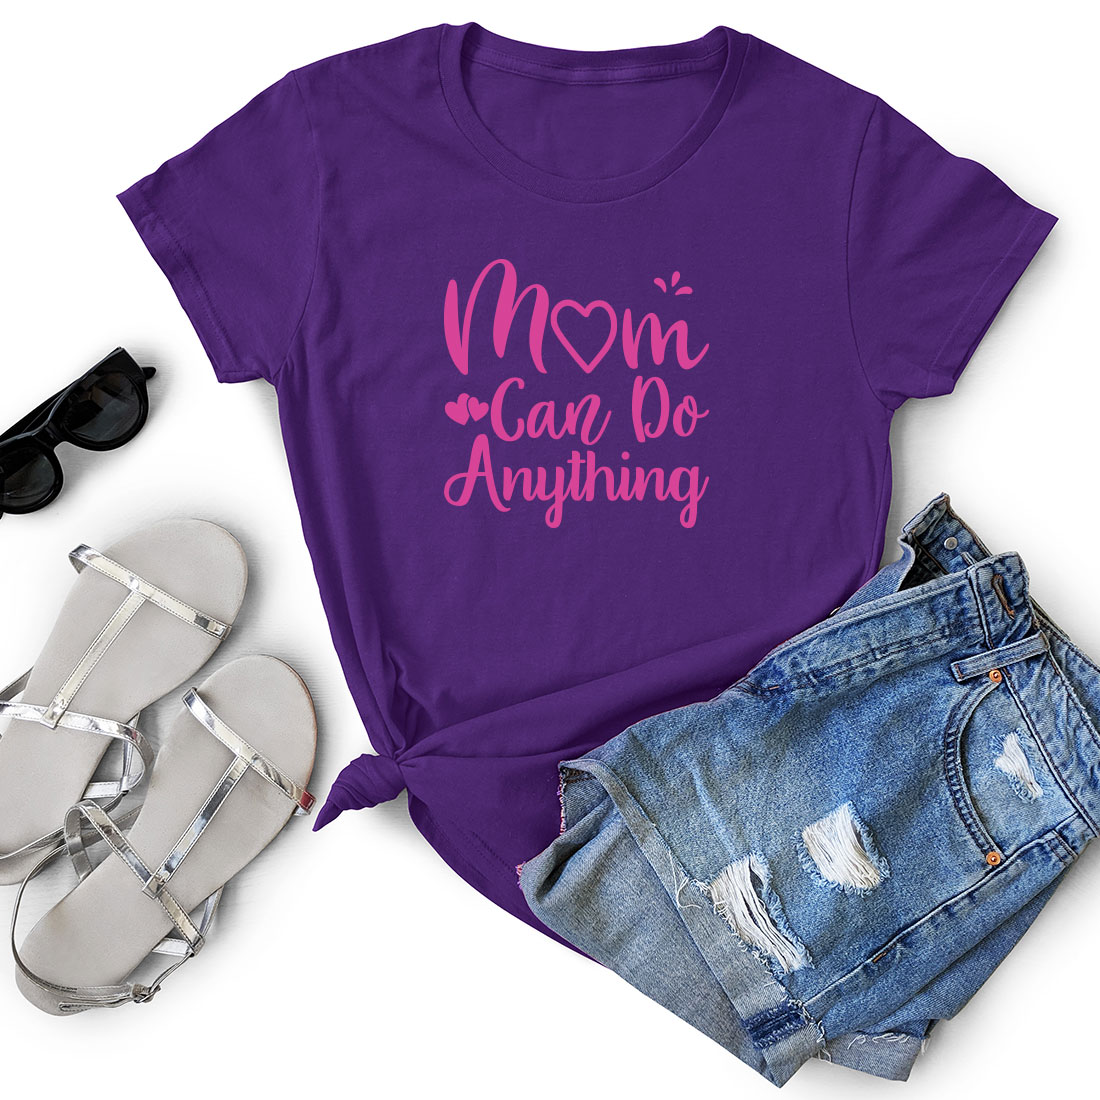 T - shirt that says mom can do anything next to a pair of shorts.